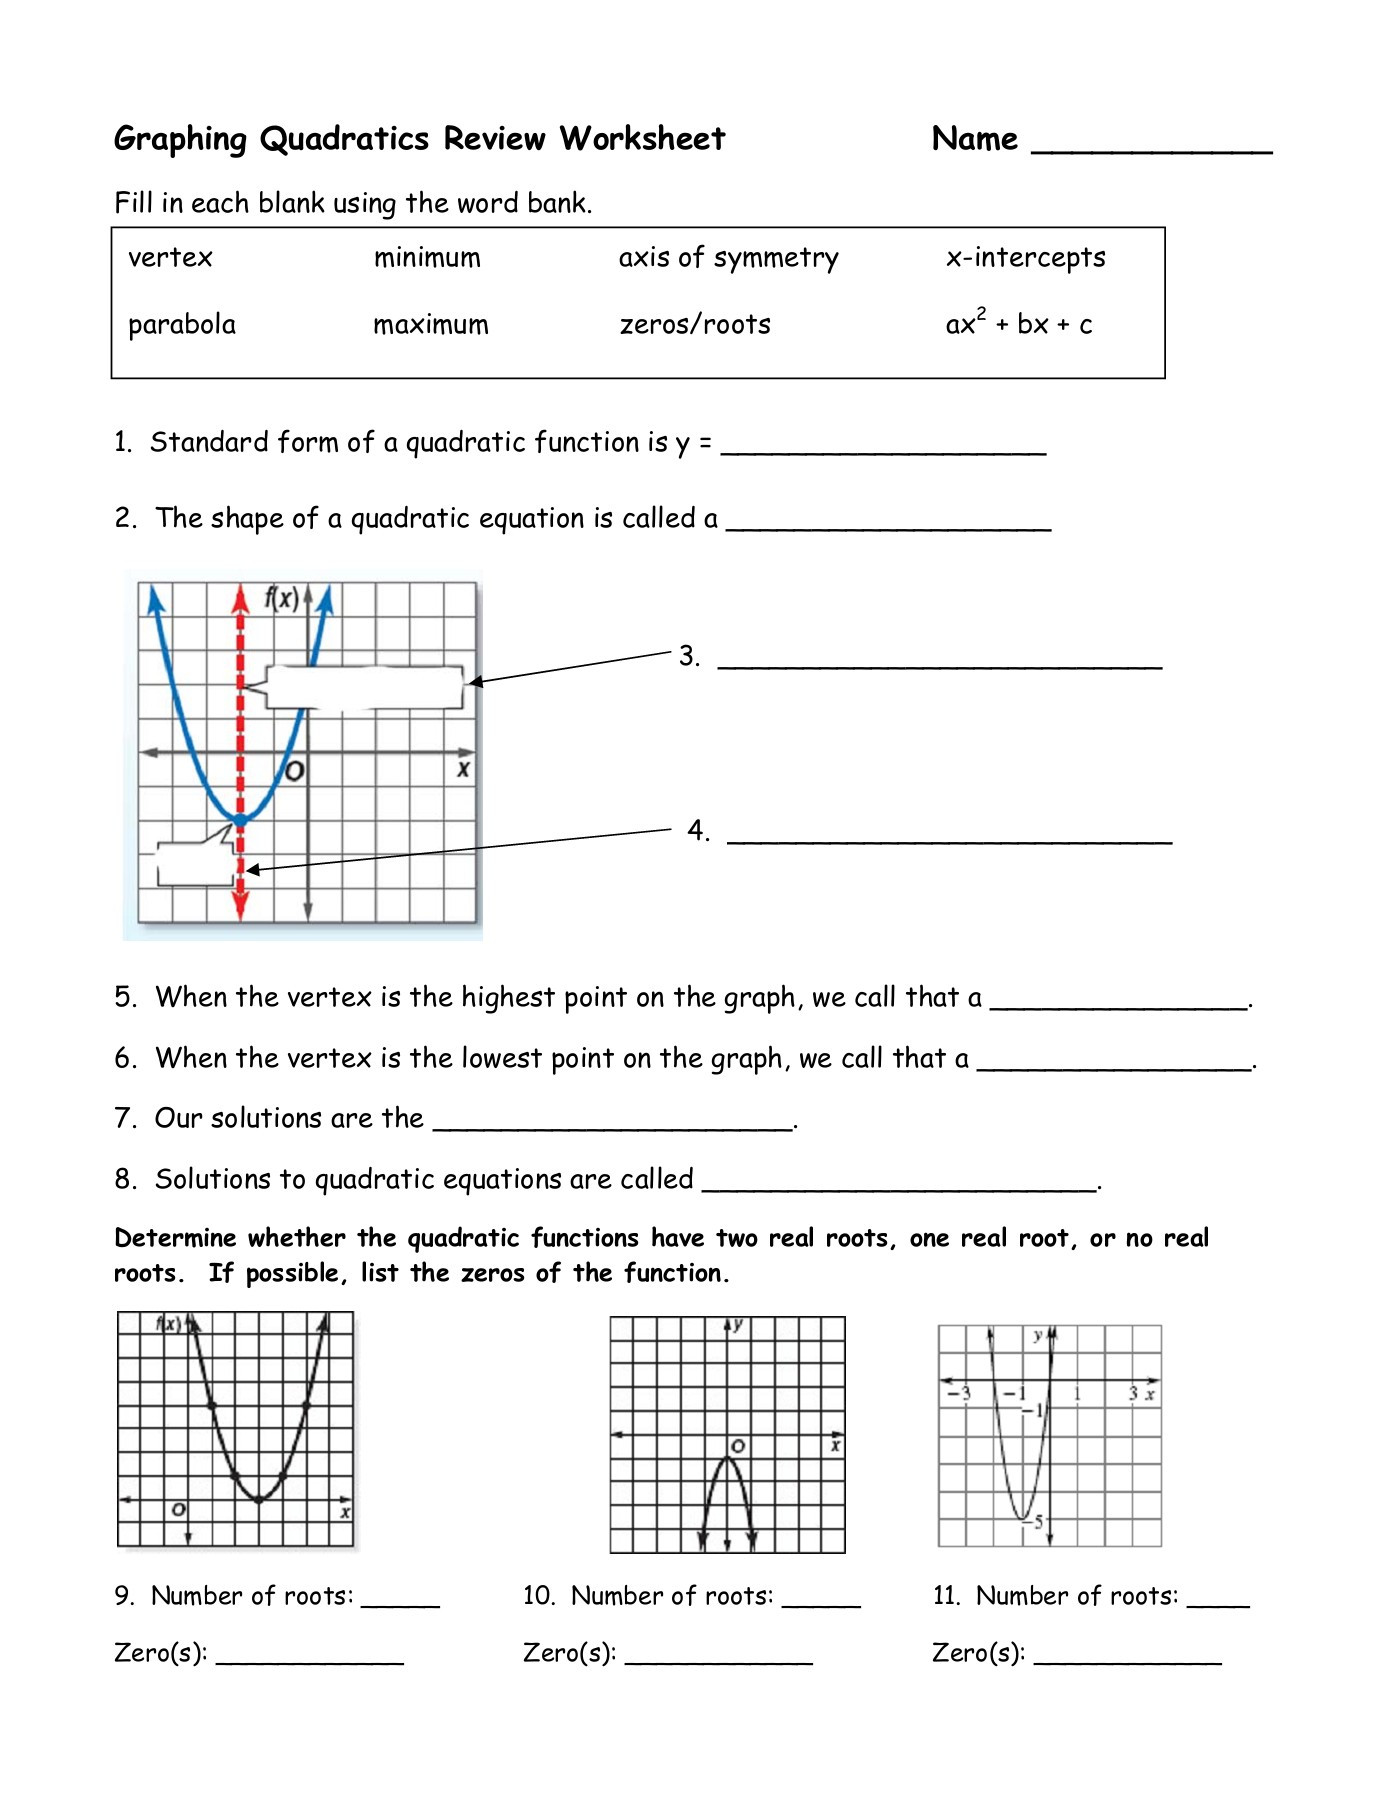 Graphs Of Functions Worksheet Graphing Quadratics Review Worksheet Name Wikispaces Pages